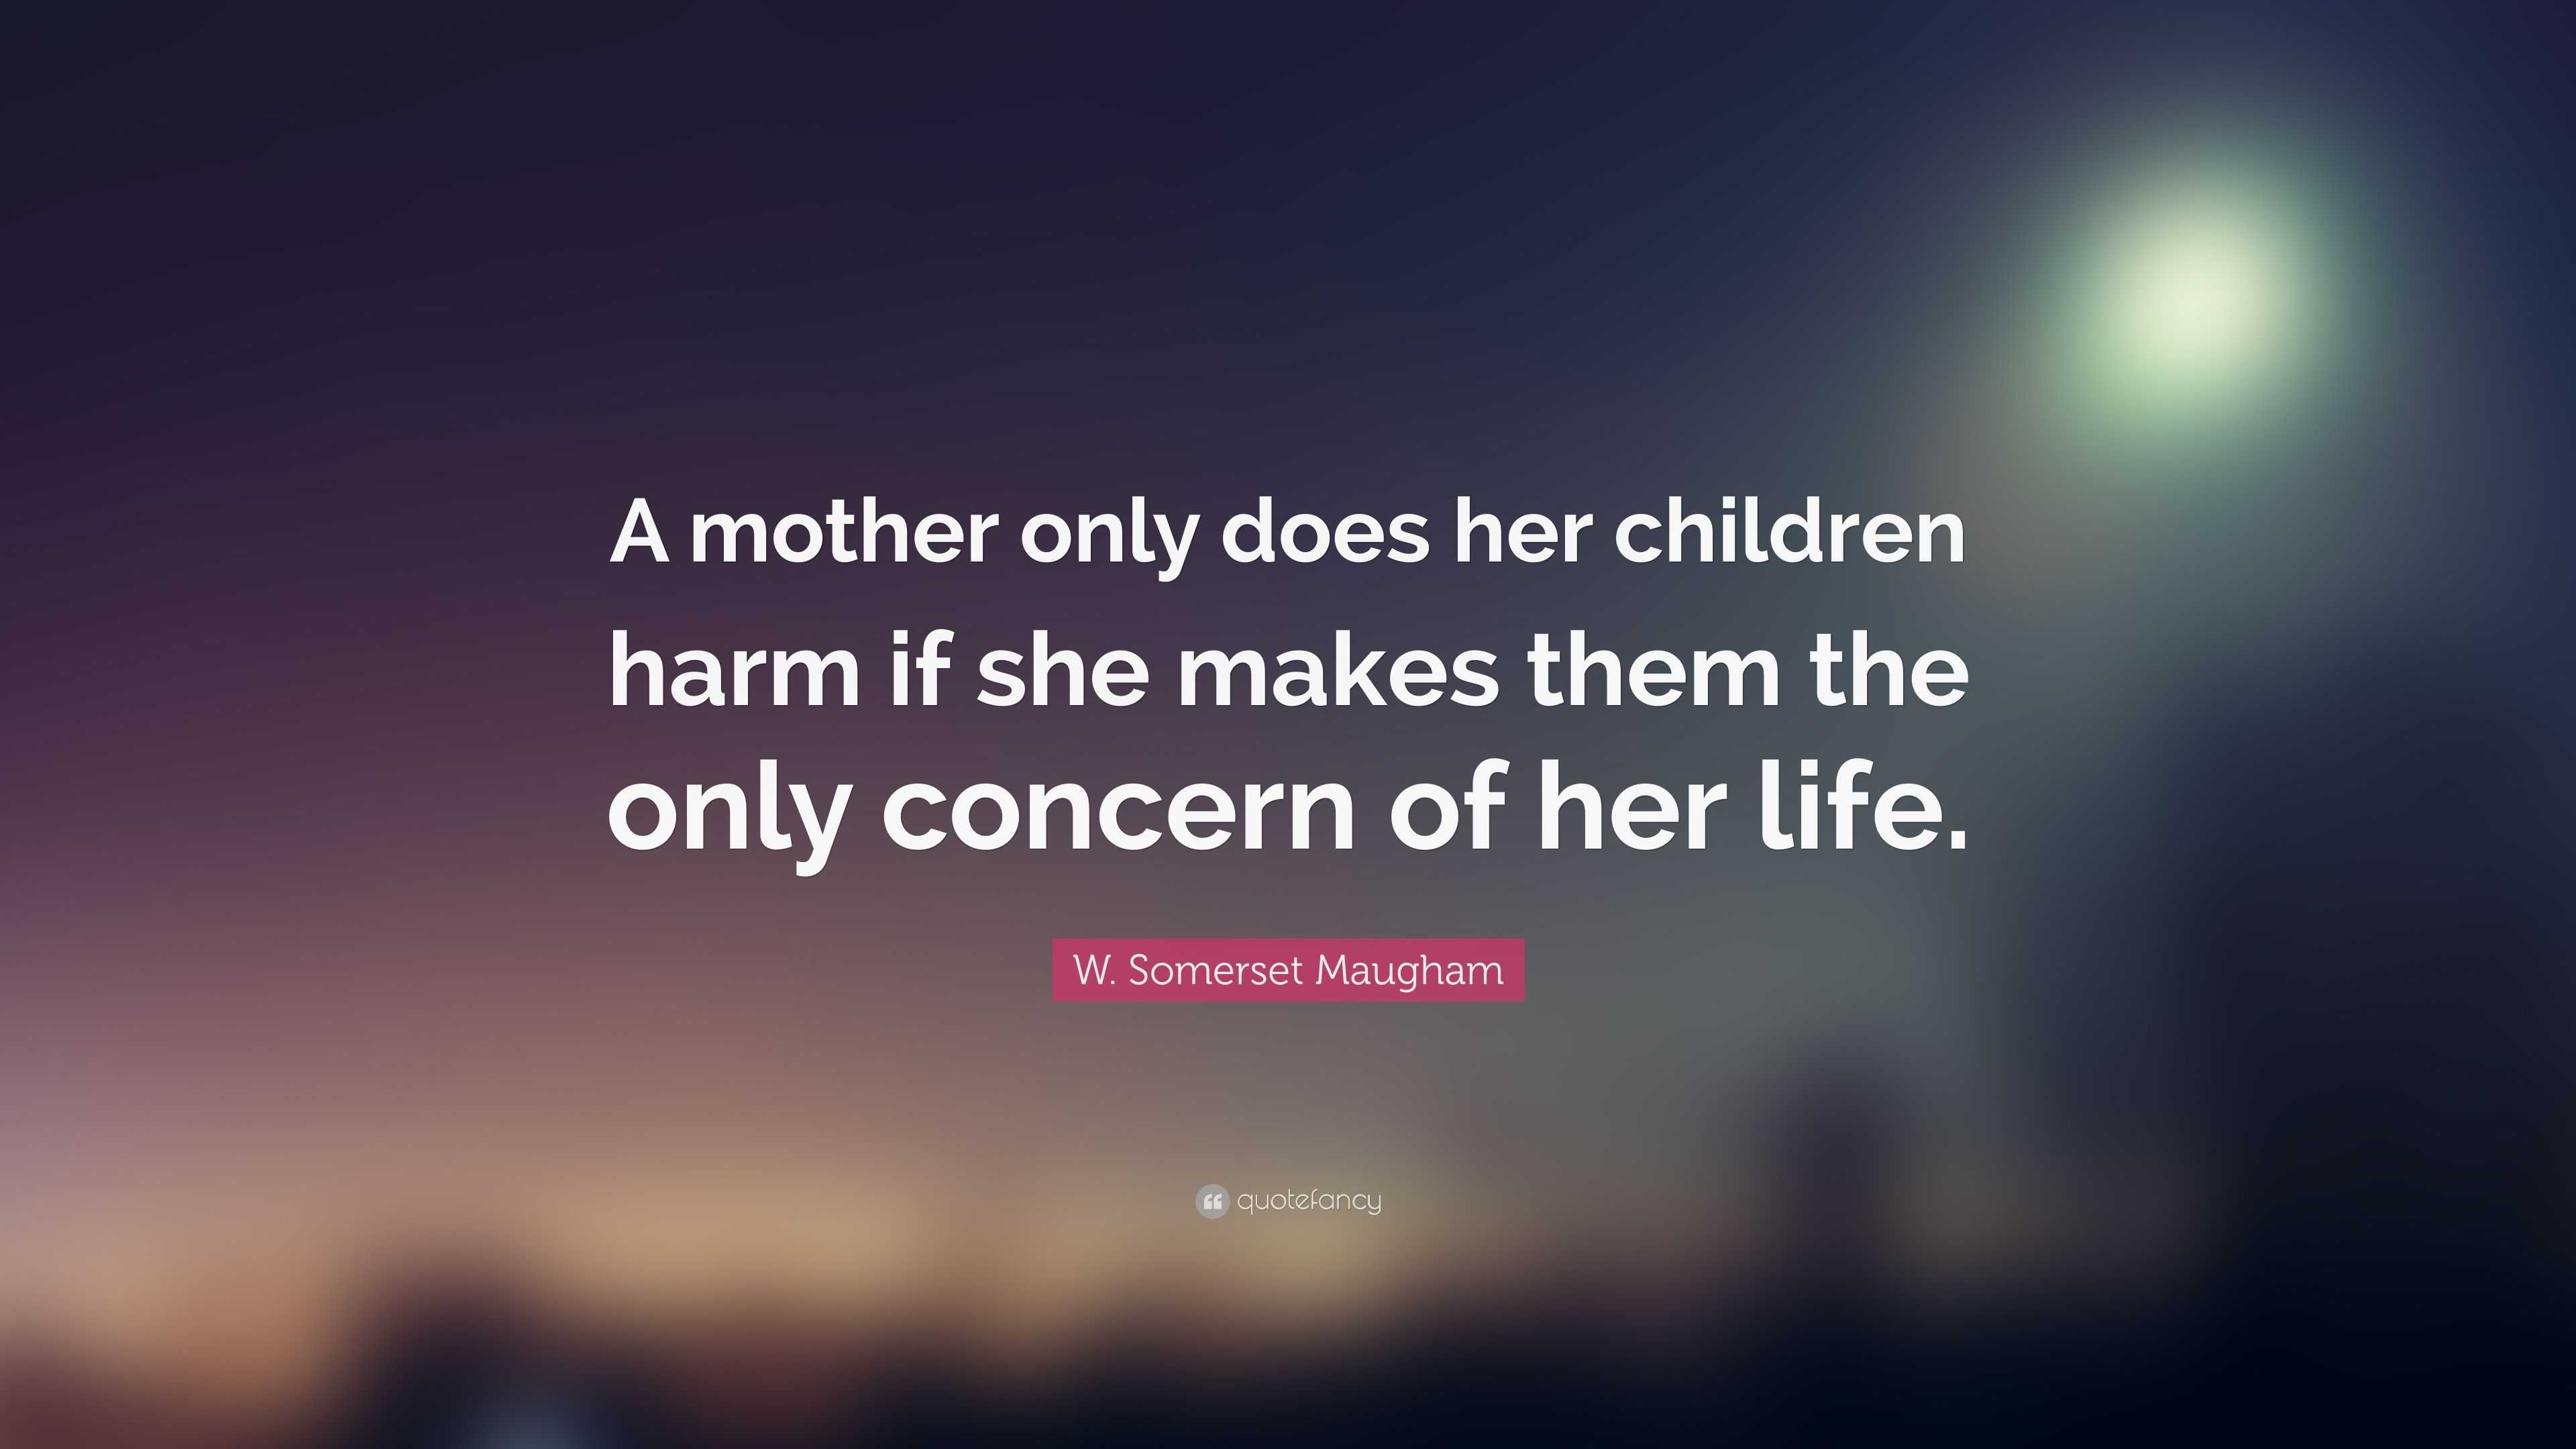 W. Somerset Maugham Quote: “A mother only does her children harm if she ...